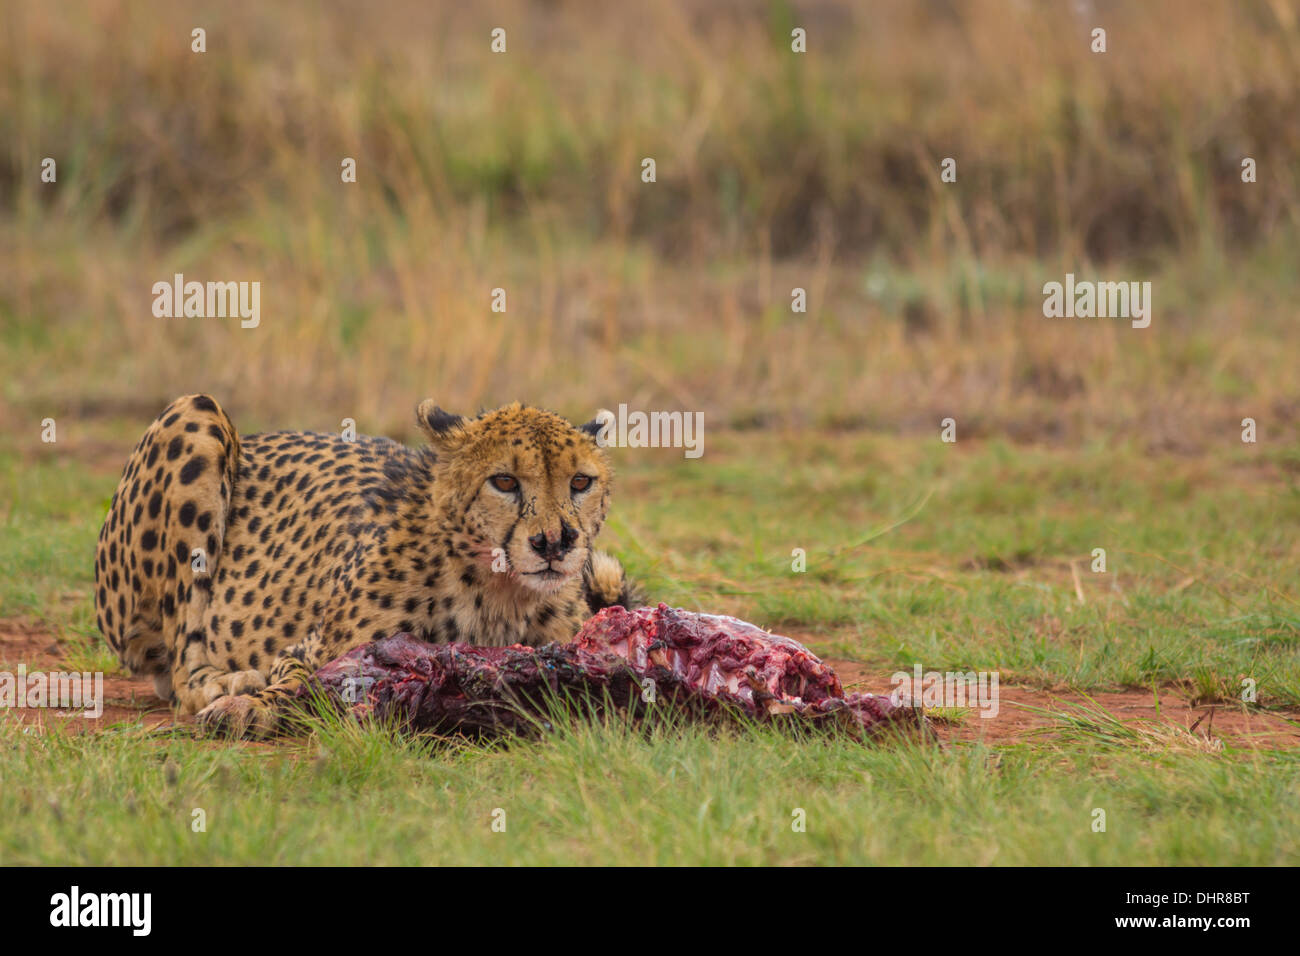 Cheetah Takes A Break From Eating A Carcass Stock Photo